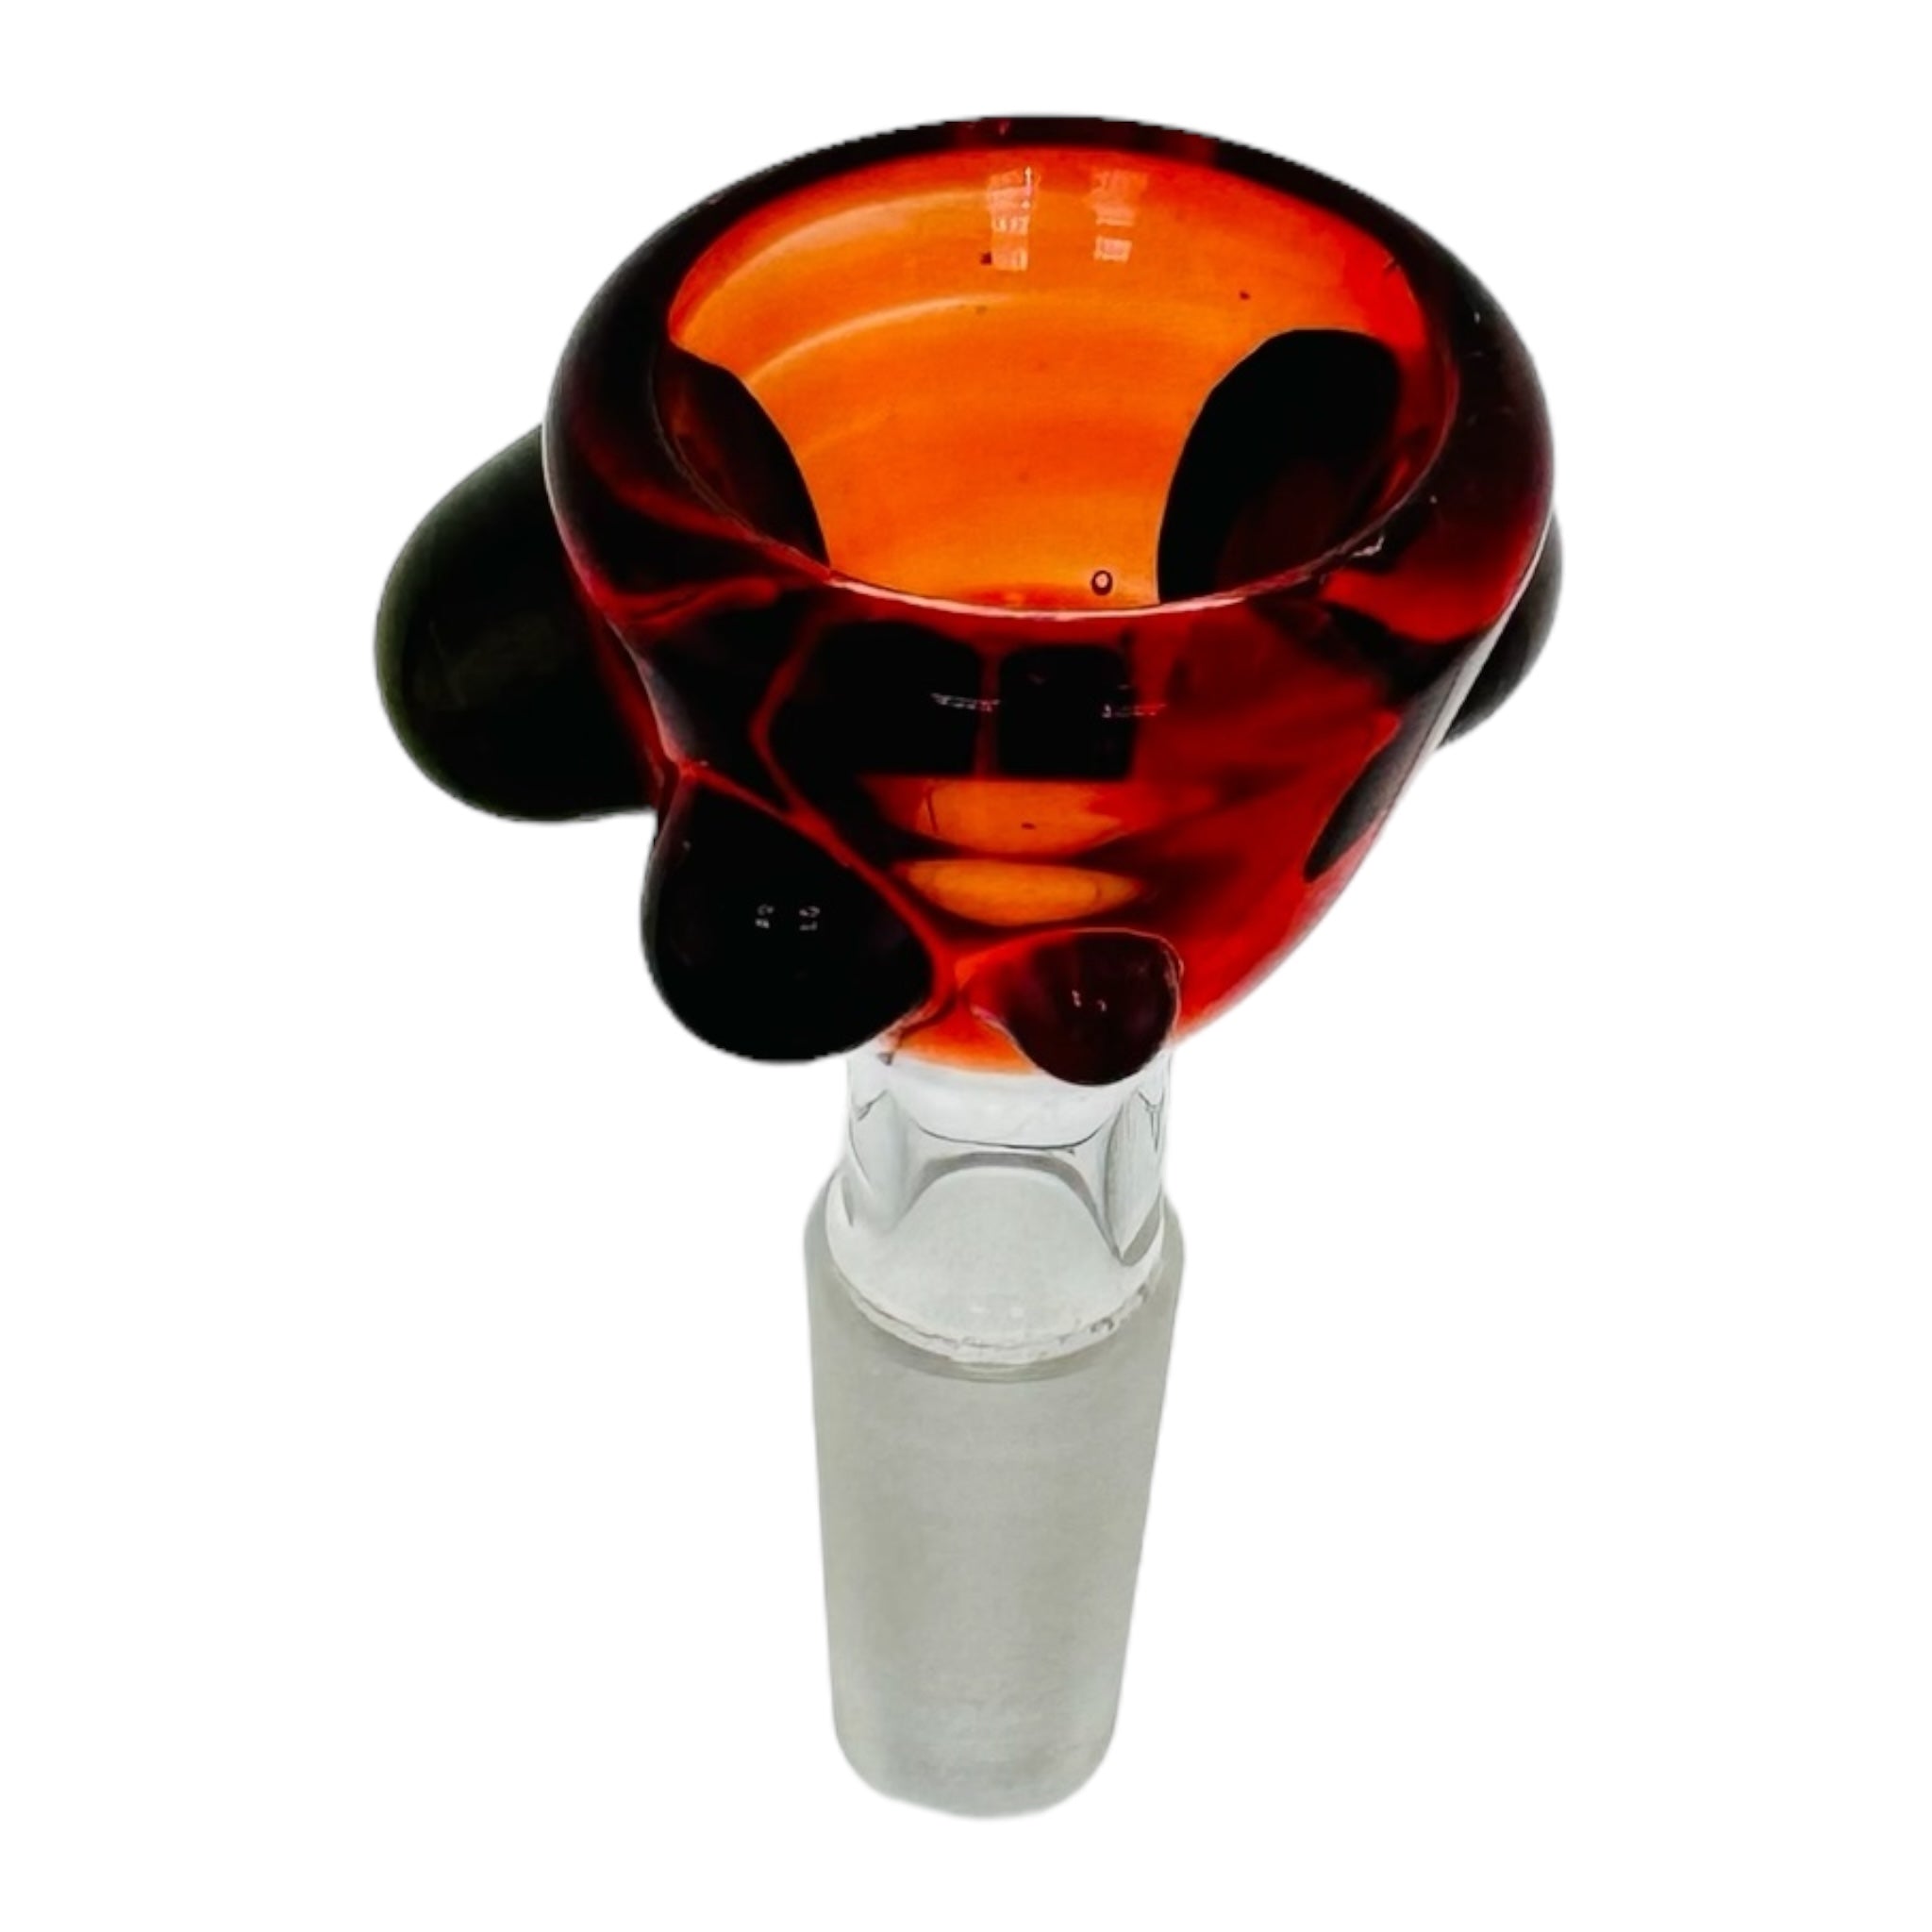 Arko Glass 10mm Flower Bowl Red Bowl With Alientech Dots